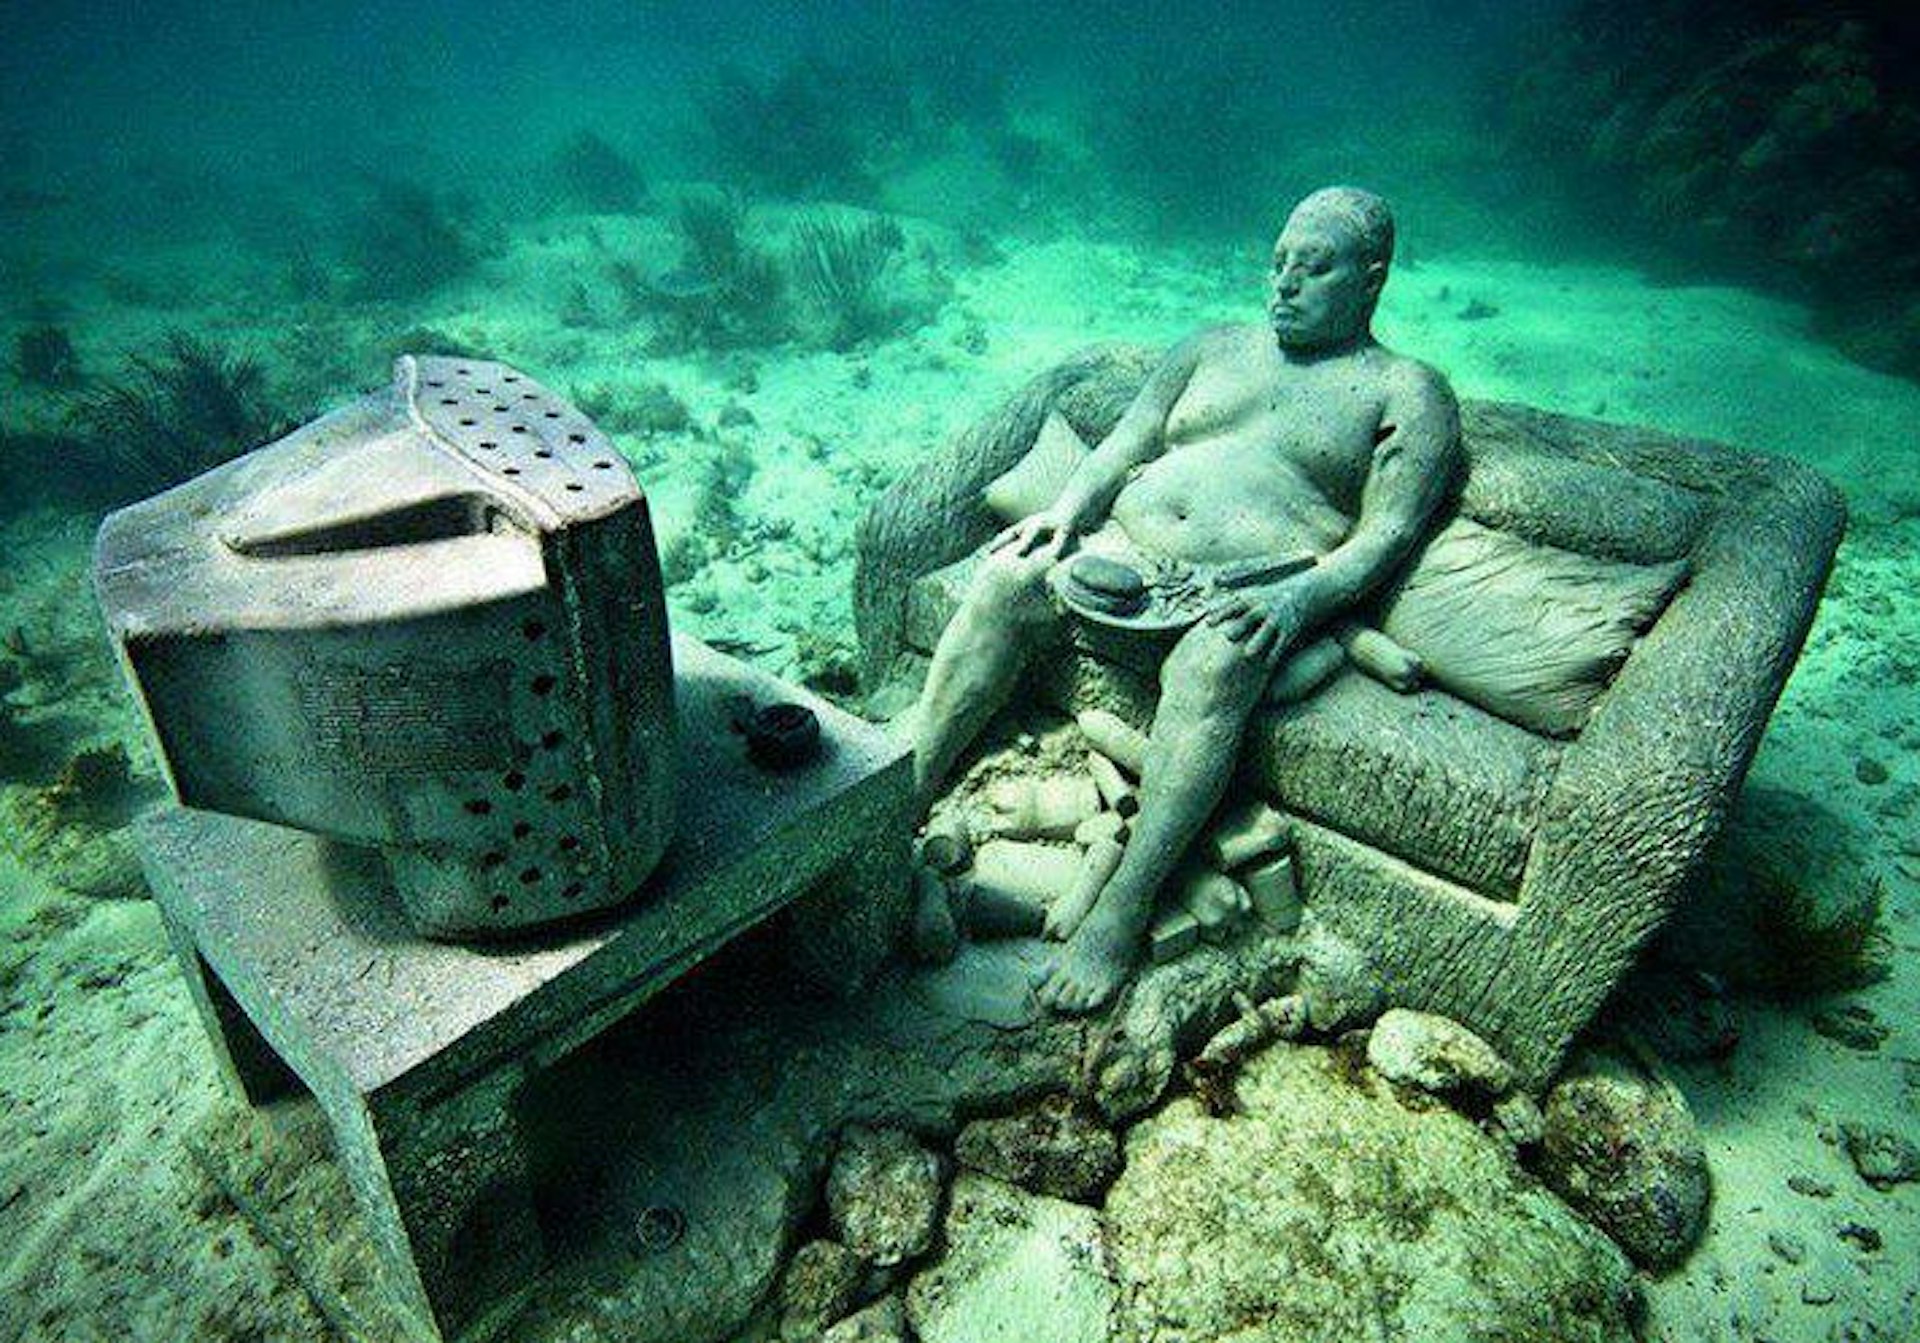 MUSA, the underwater museum, has some amusing exhibits. Image by 2il org / CC BY 2.0